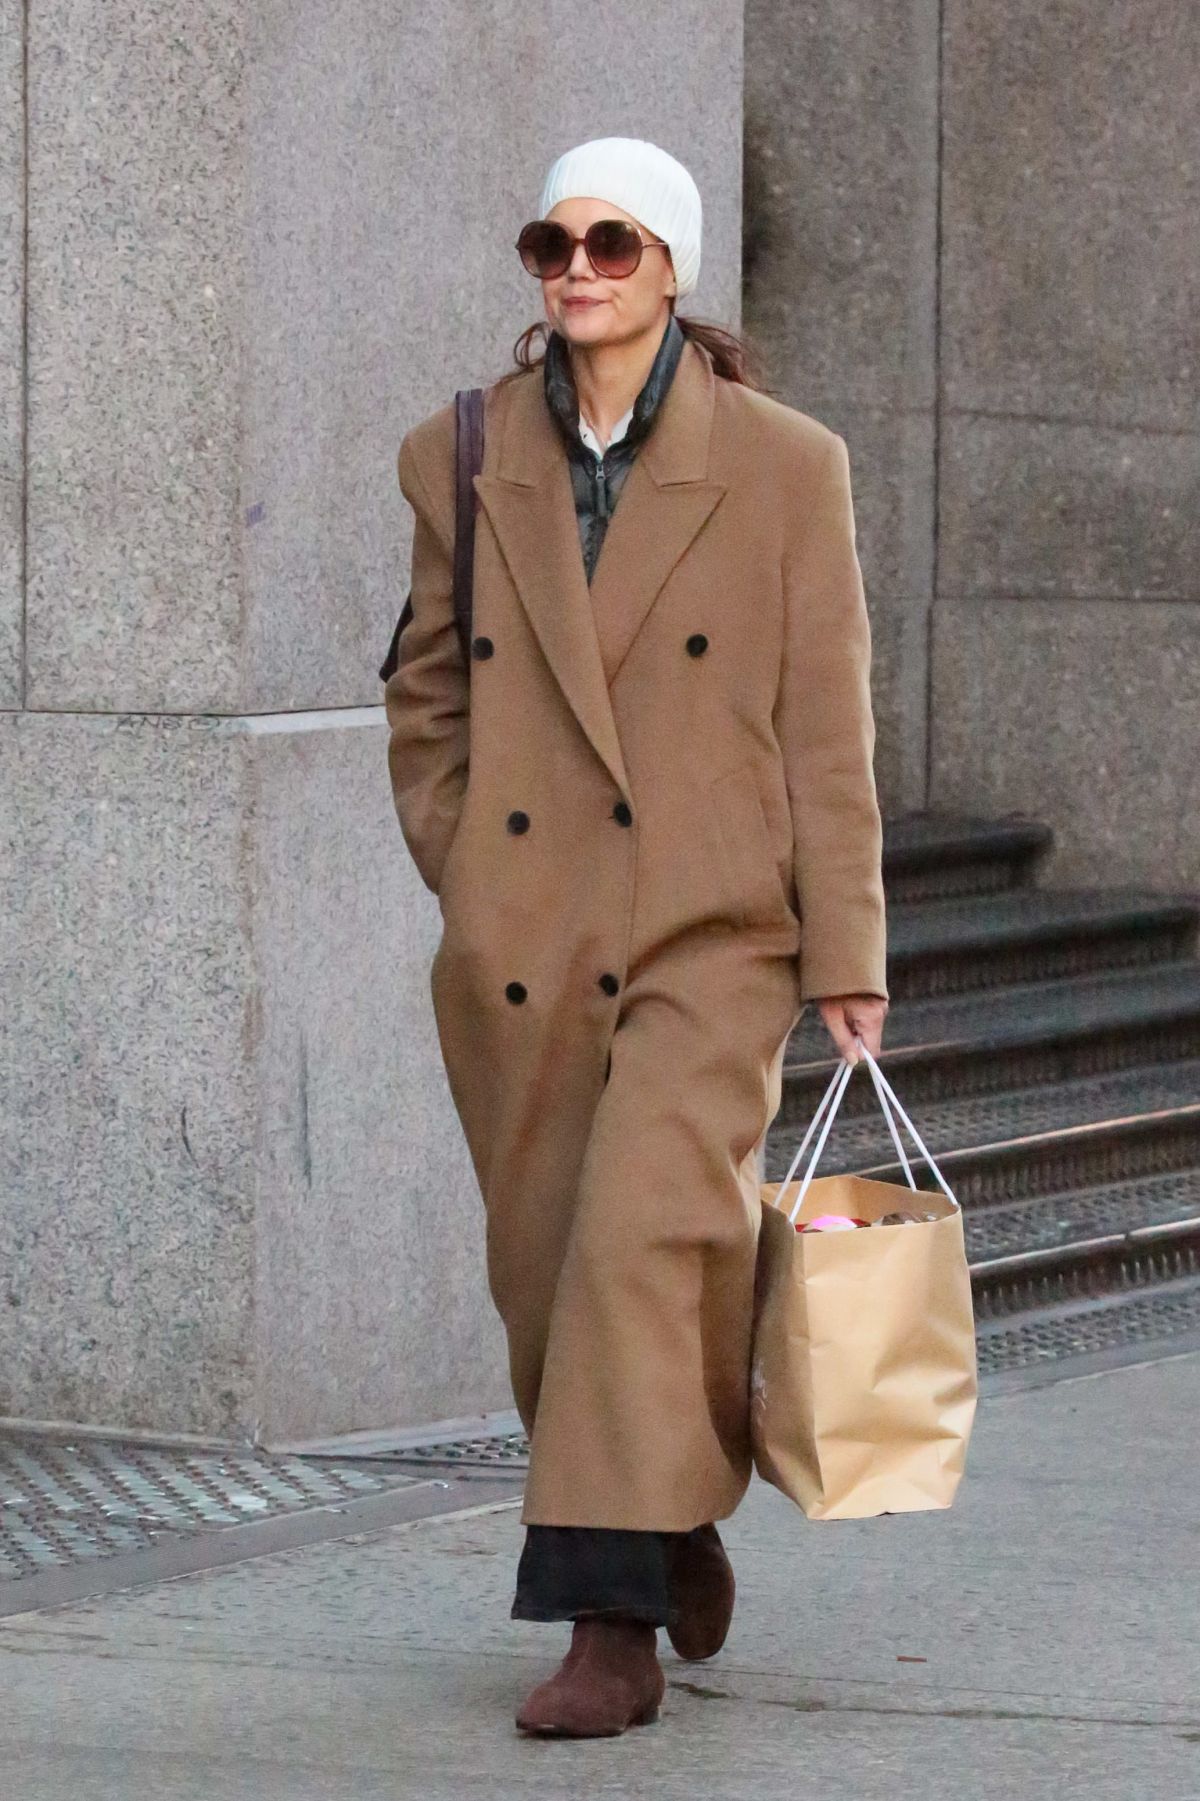 Katie Holmes, 45, looks stony-faced in chilly NYC after ex